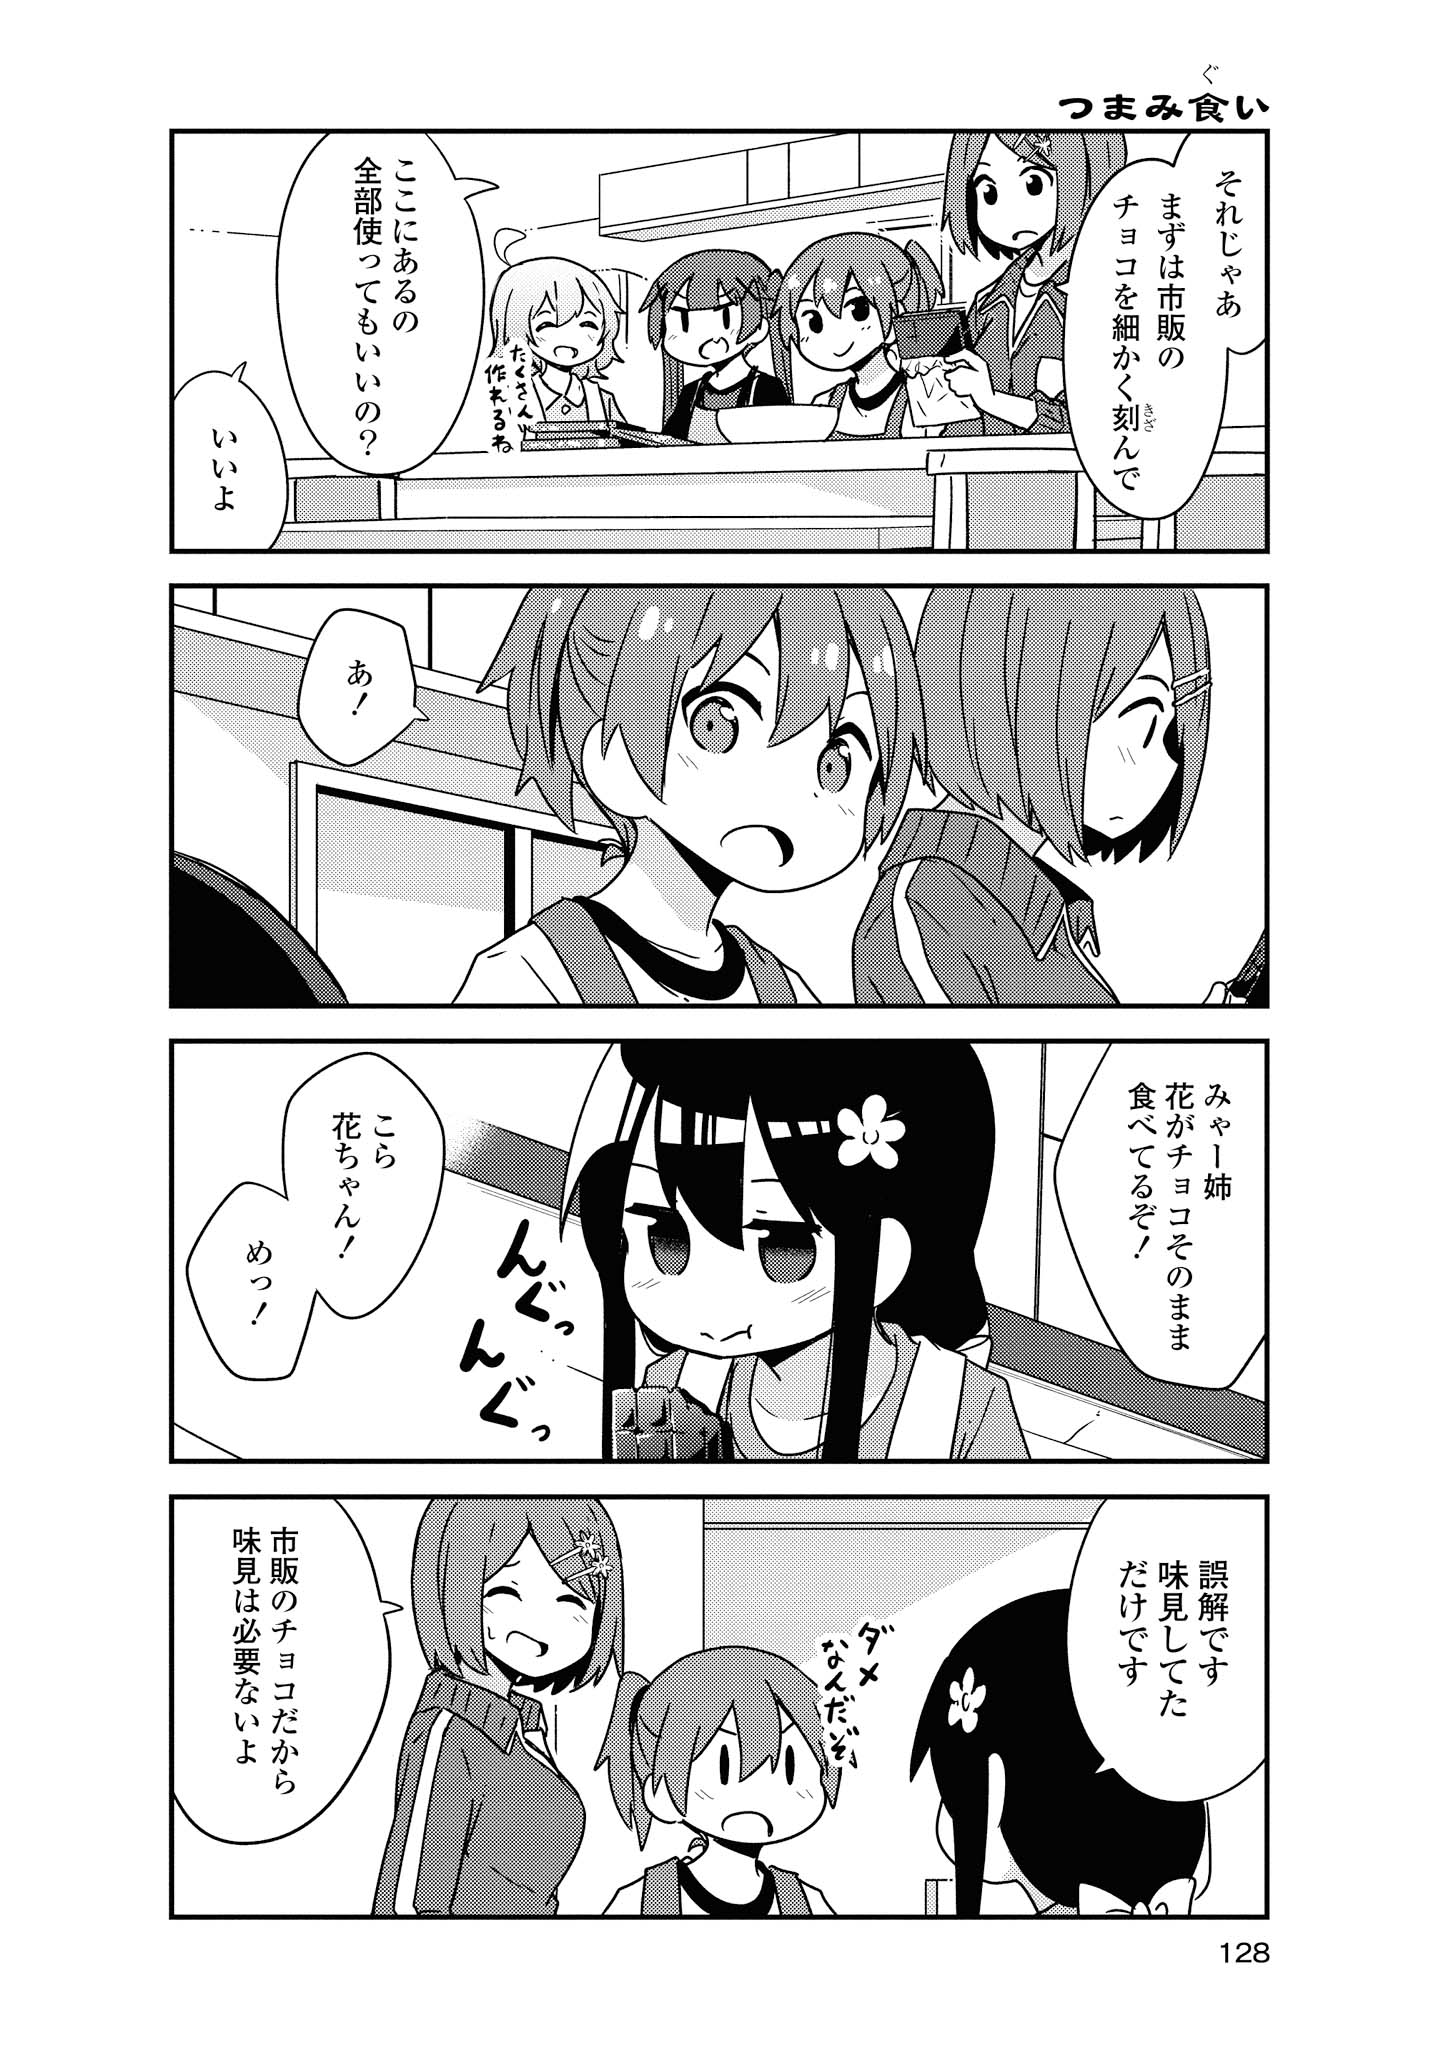 Wataten! An Angel Flew Down to Me 私に天使が舞い降りた！ 第51話 - Page 4